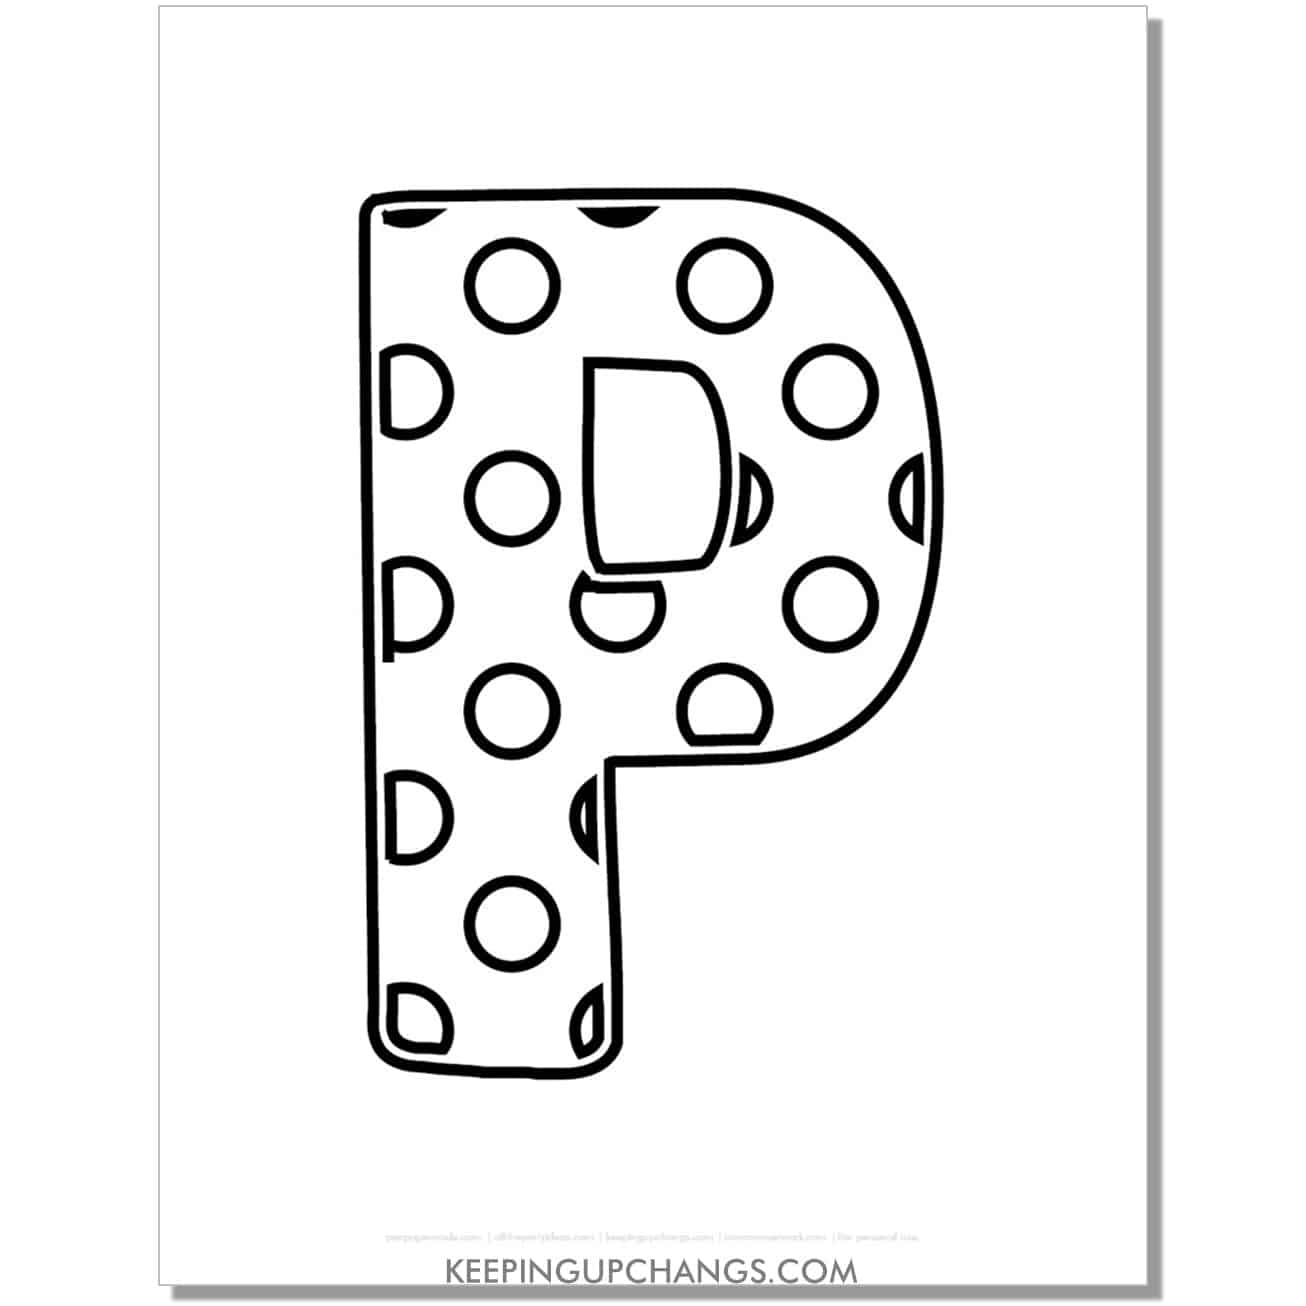 free alphabet letter p coloring page with polka dots for toddlers, preschool, kindergarten.